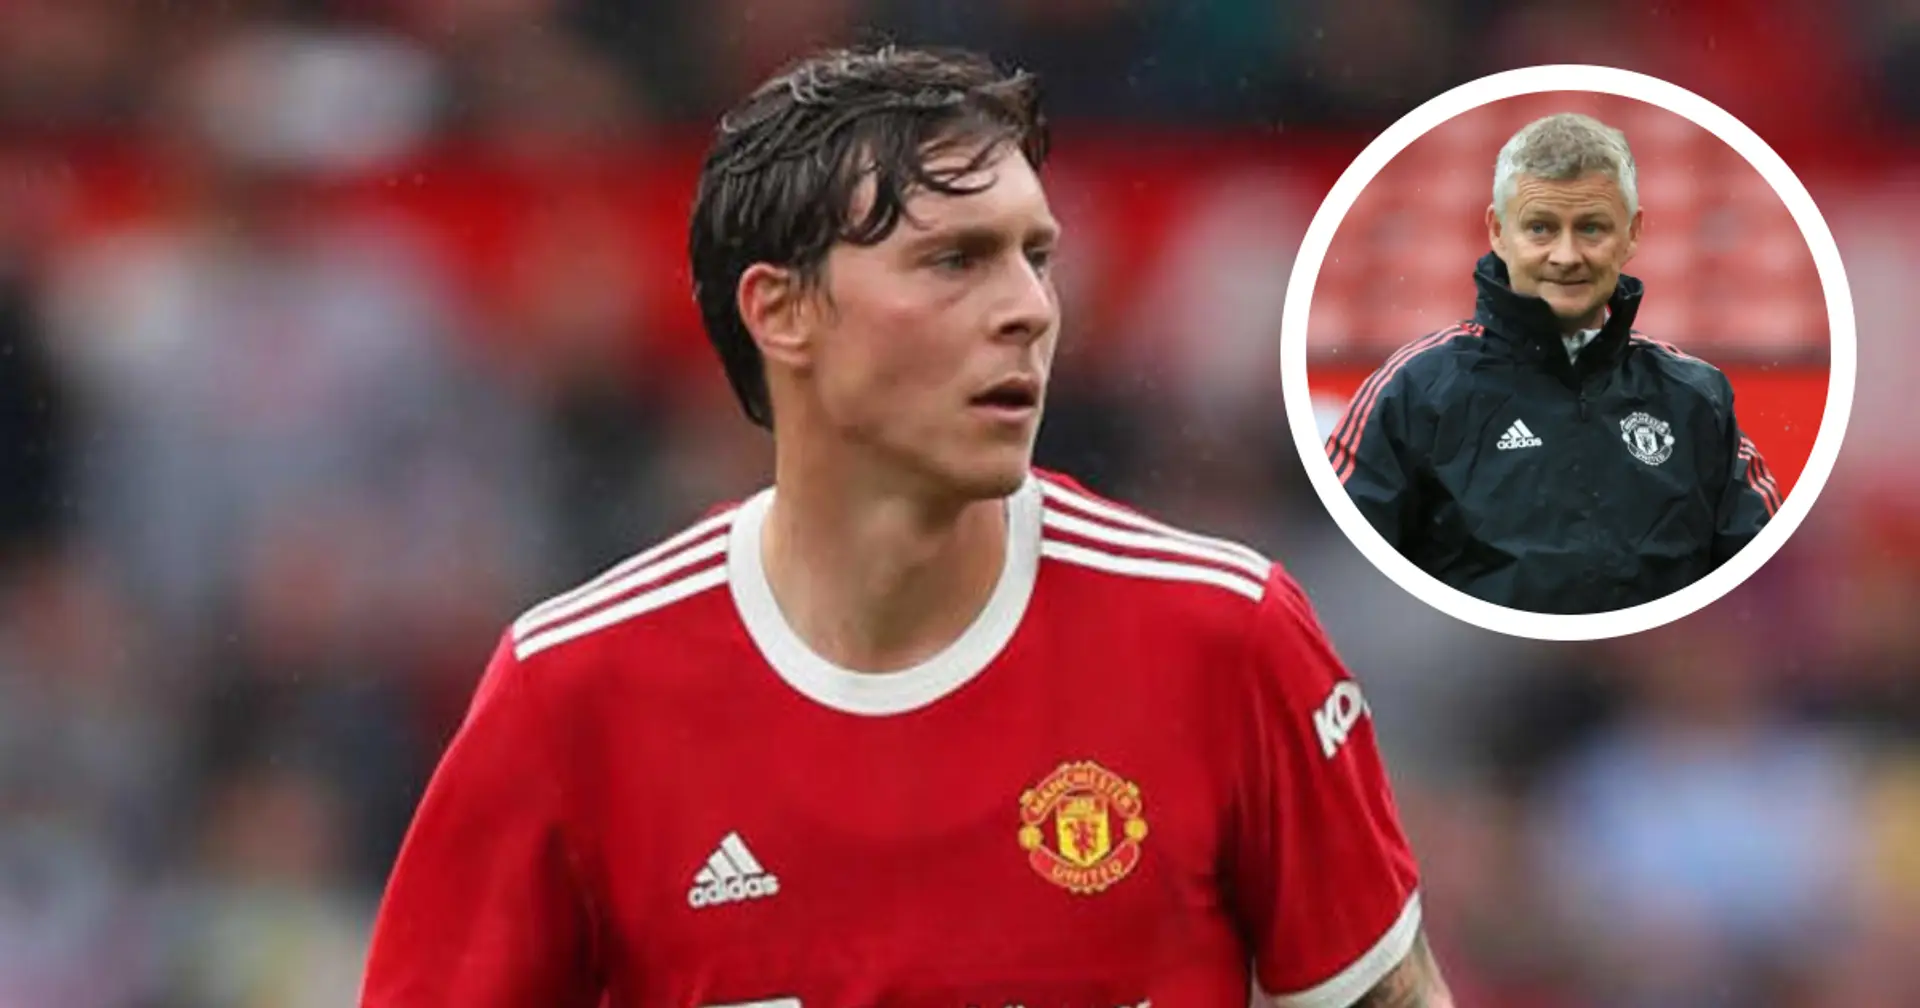 Not giving up: Victor Lindelof sends clear message to Solskjaer with convincing Leeds display